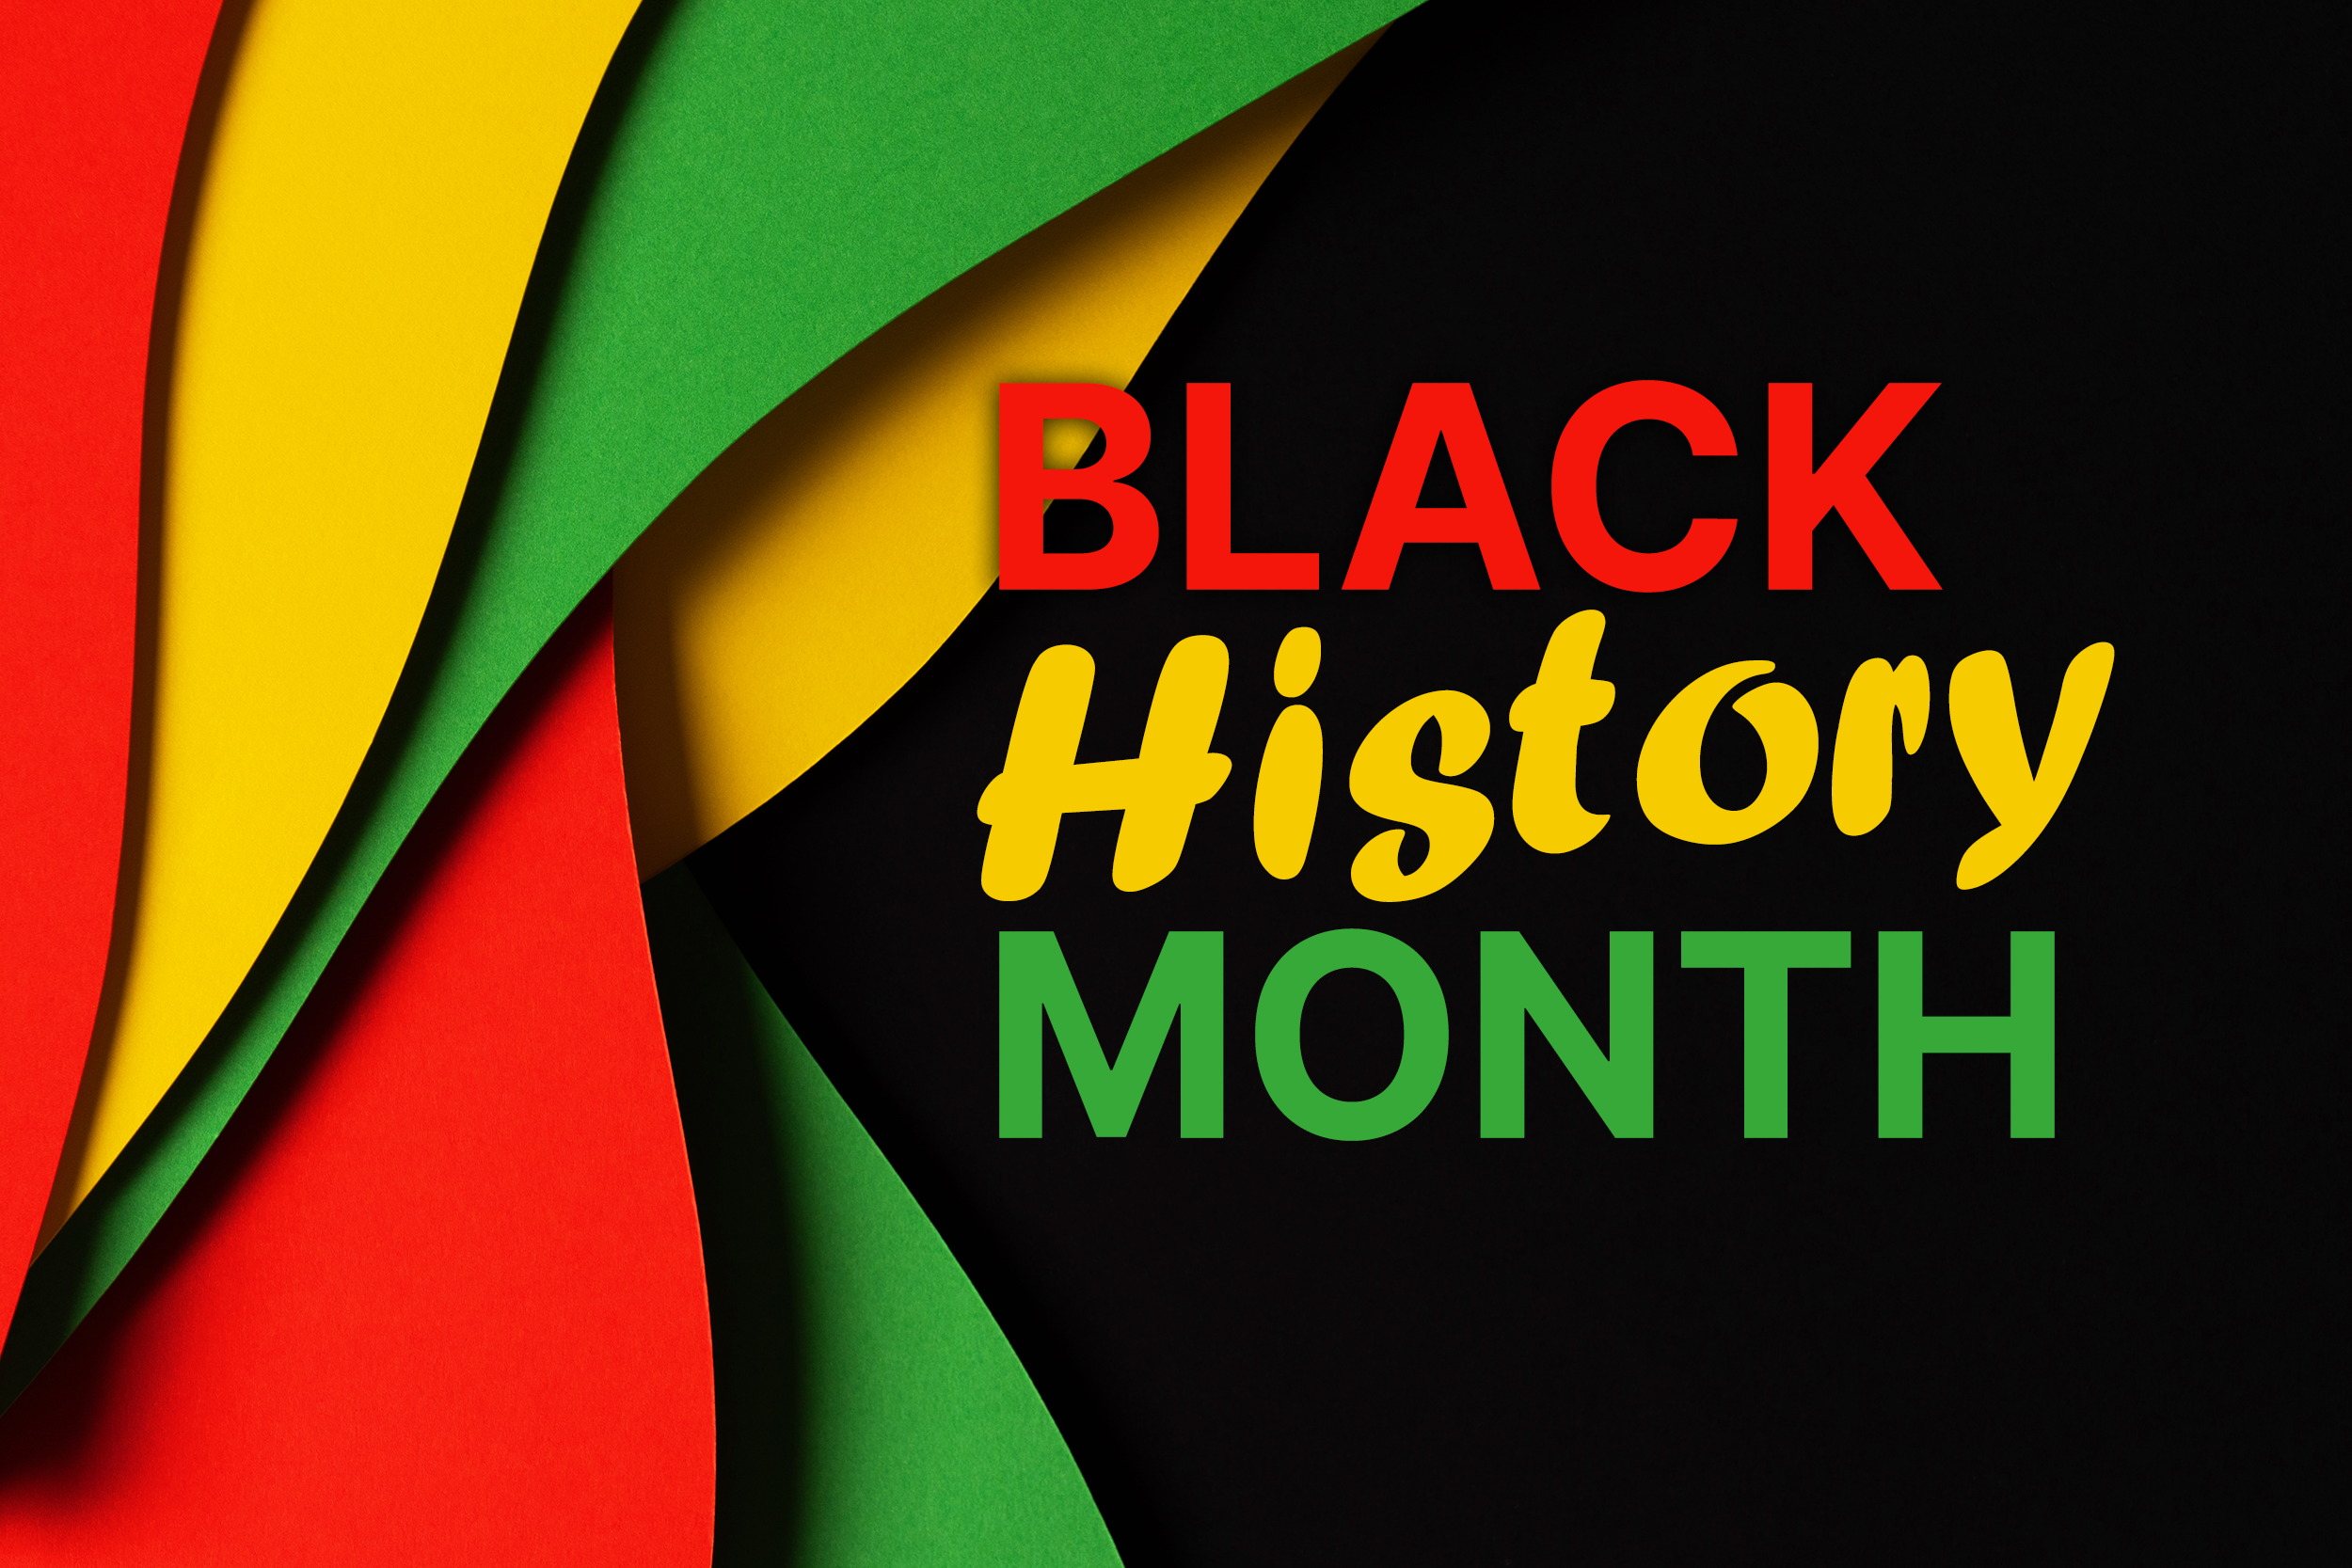 Yellow, green, red, black background with message, "Black History Month."